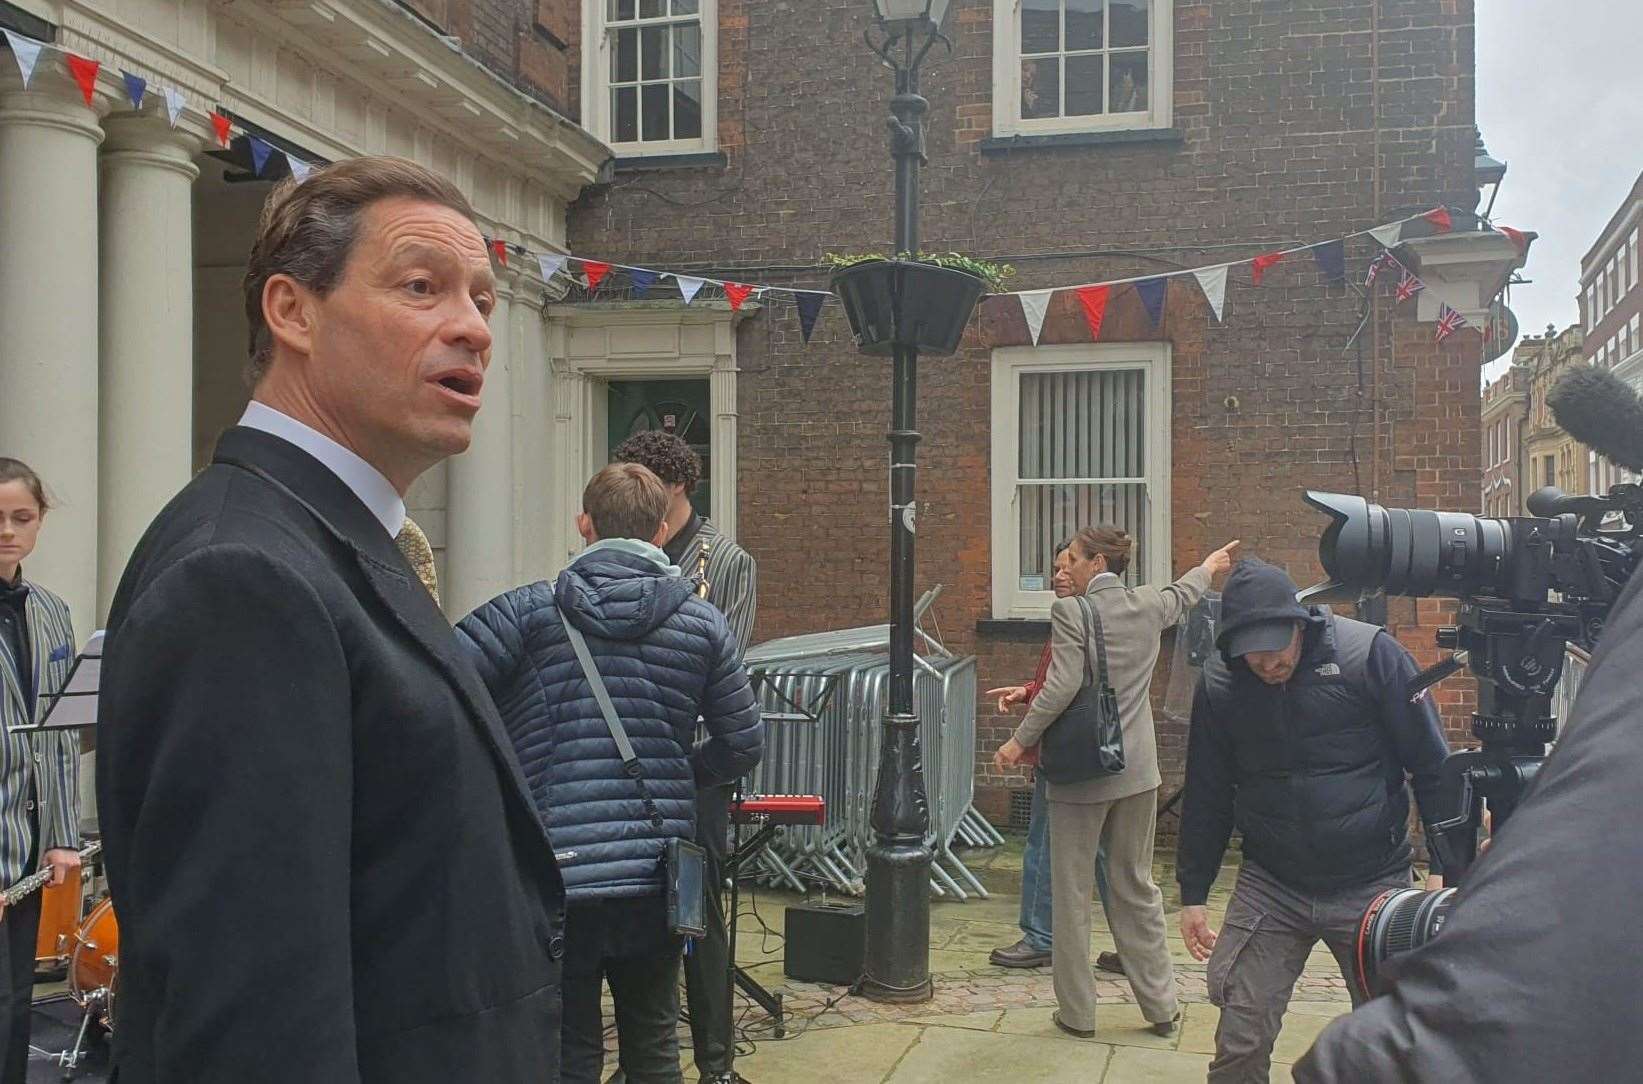 The Crown filming in Rochester – Dominic West as Prince (now King) Charles